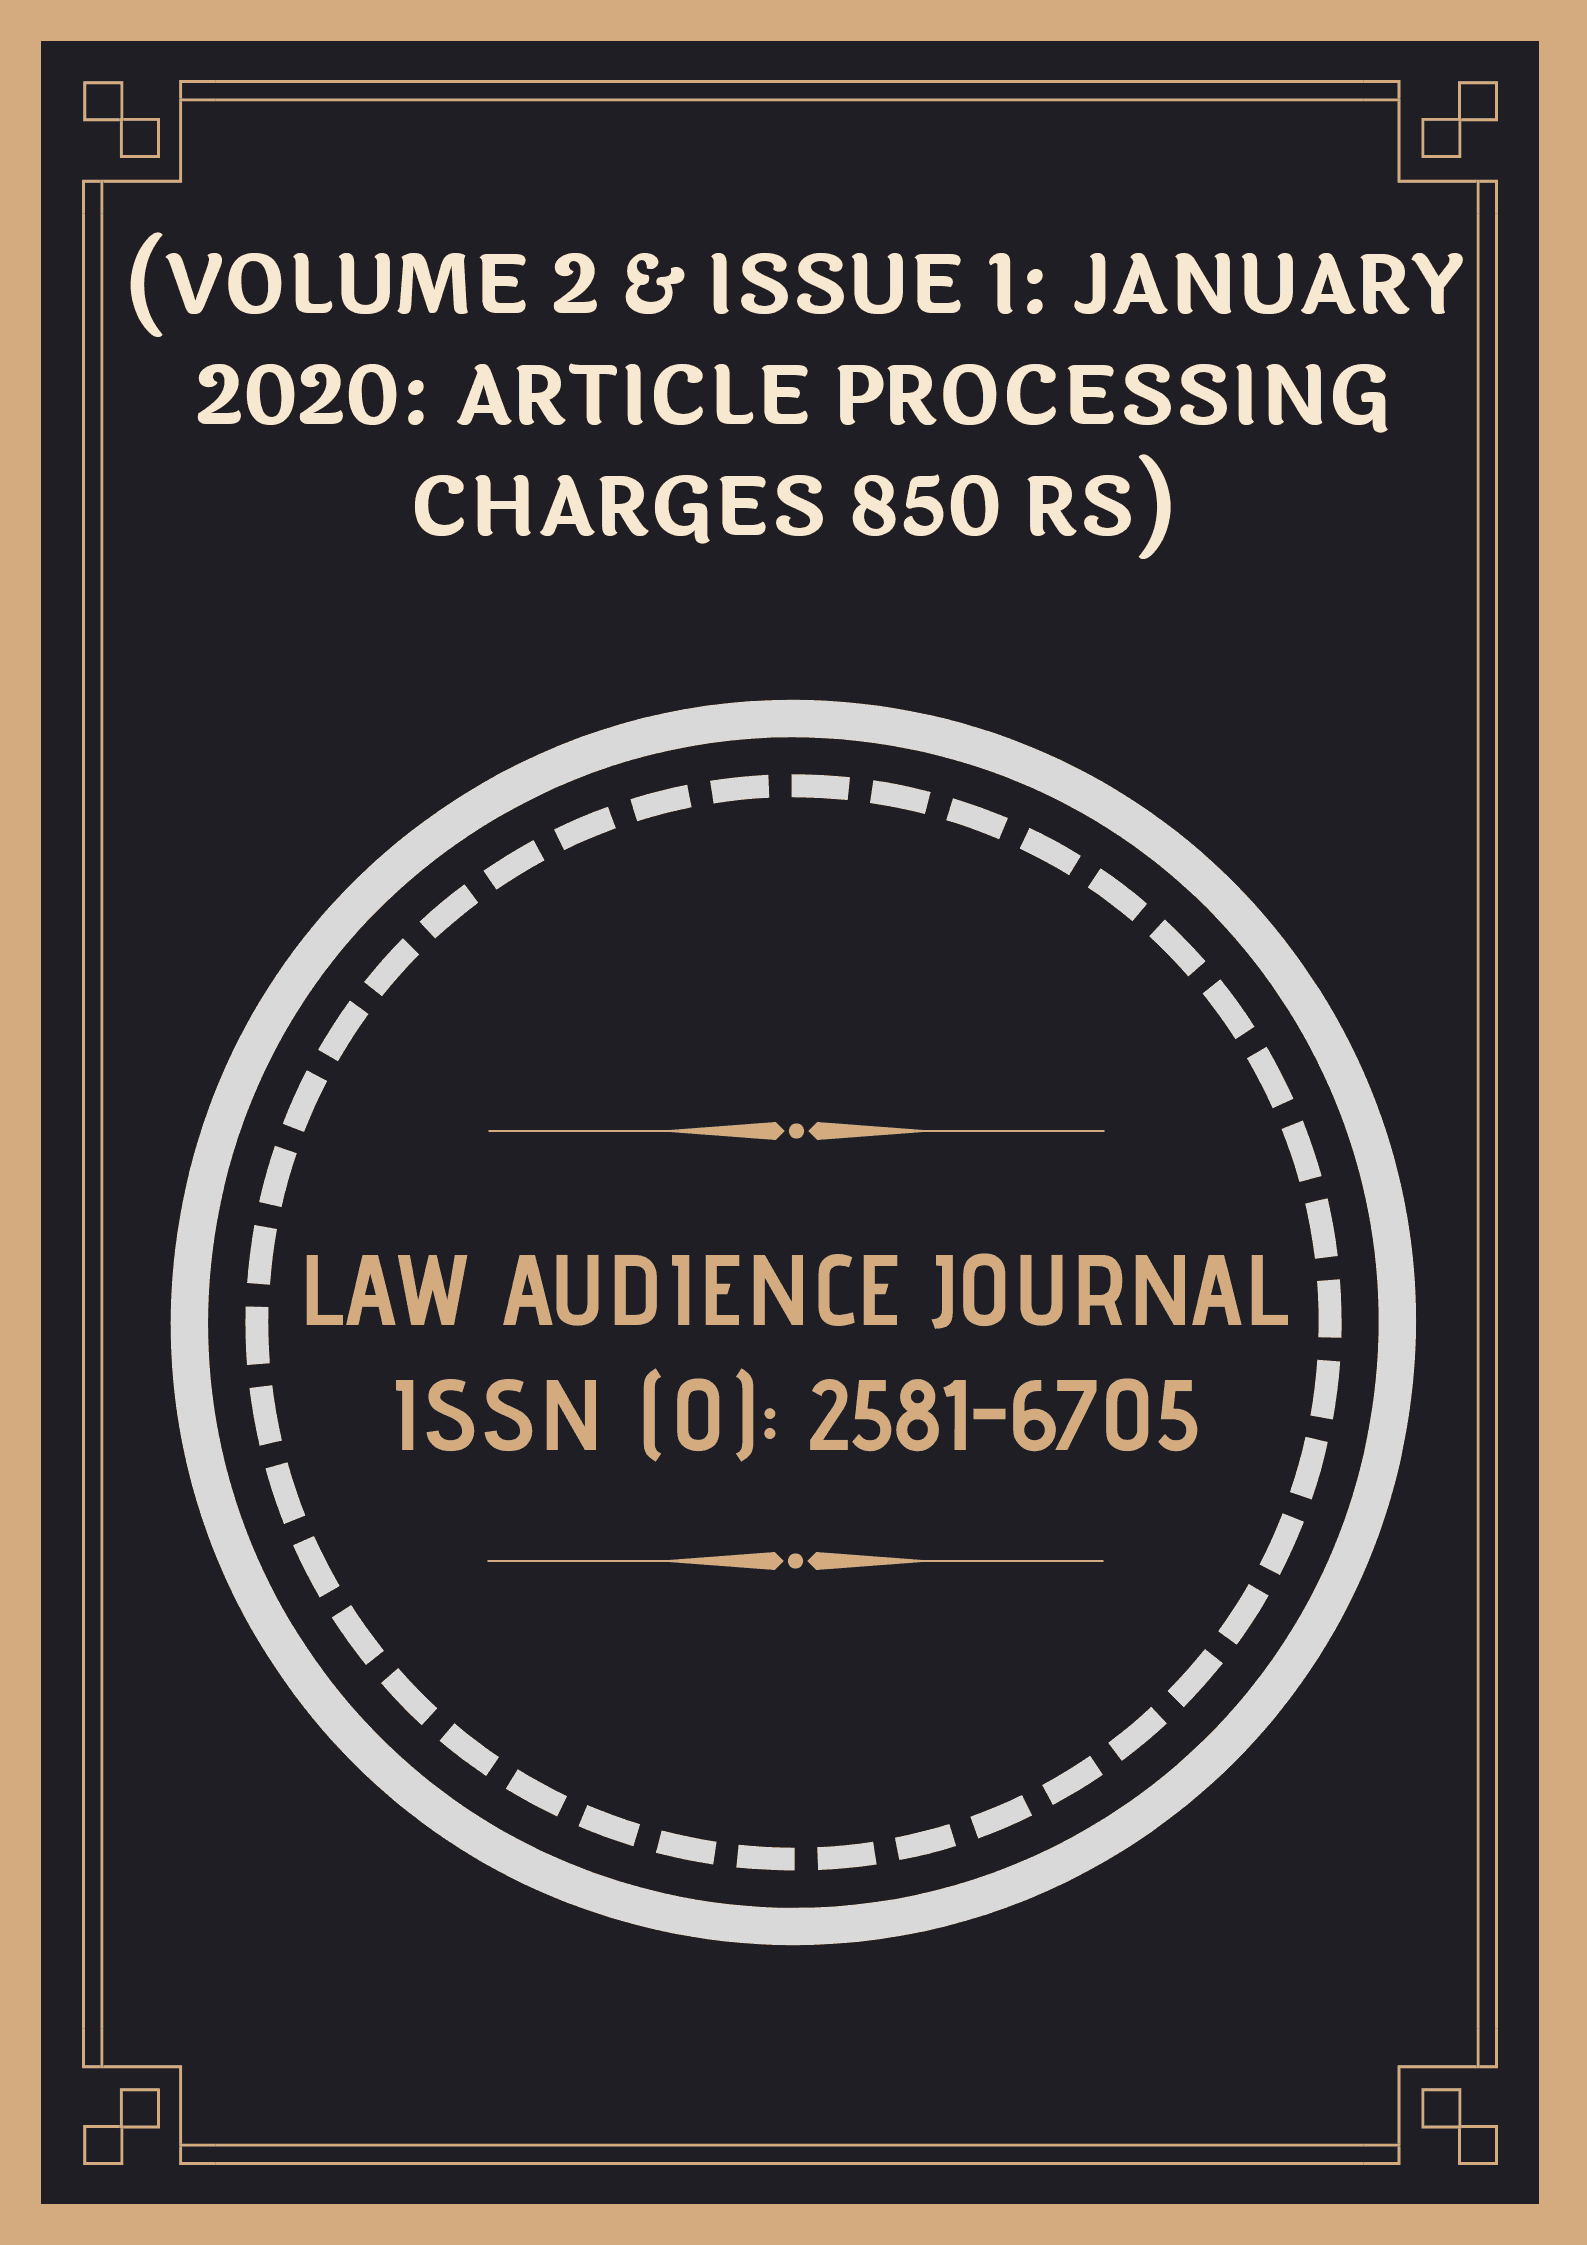 Read more about the article CALL FOR PAPERS: LAW AUDIENCE JOURNAL: VOLUME 2 & ISSUE 1 JANUARY 2020: ARTICLE PROCESSING CHARGES 850 RS: